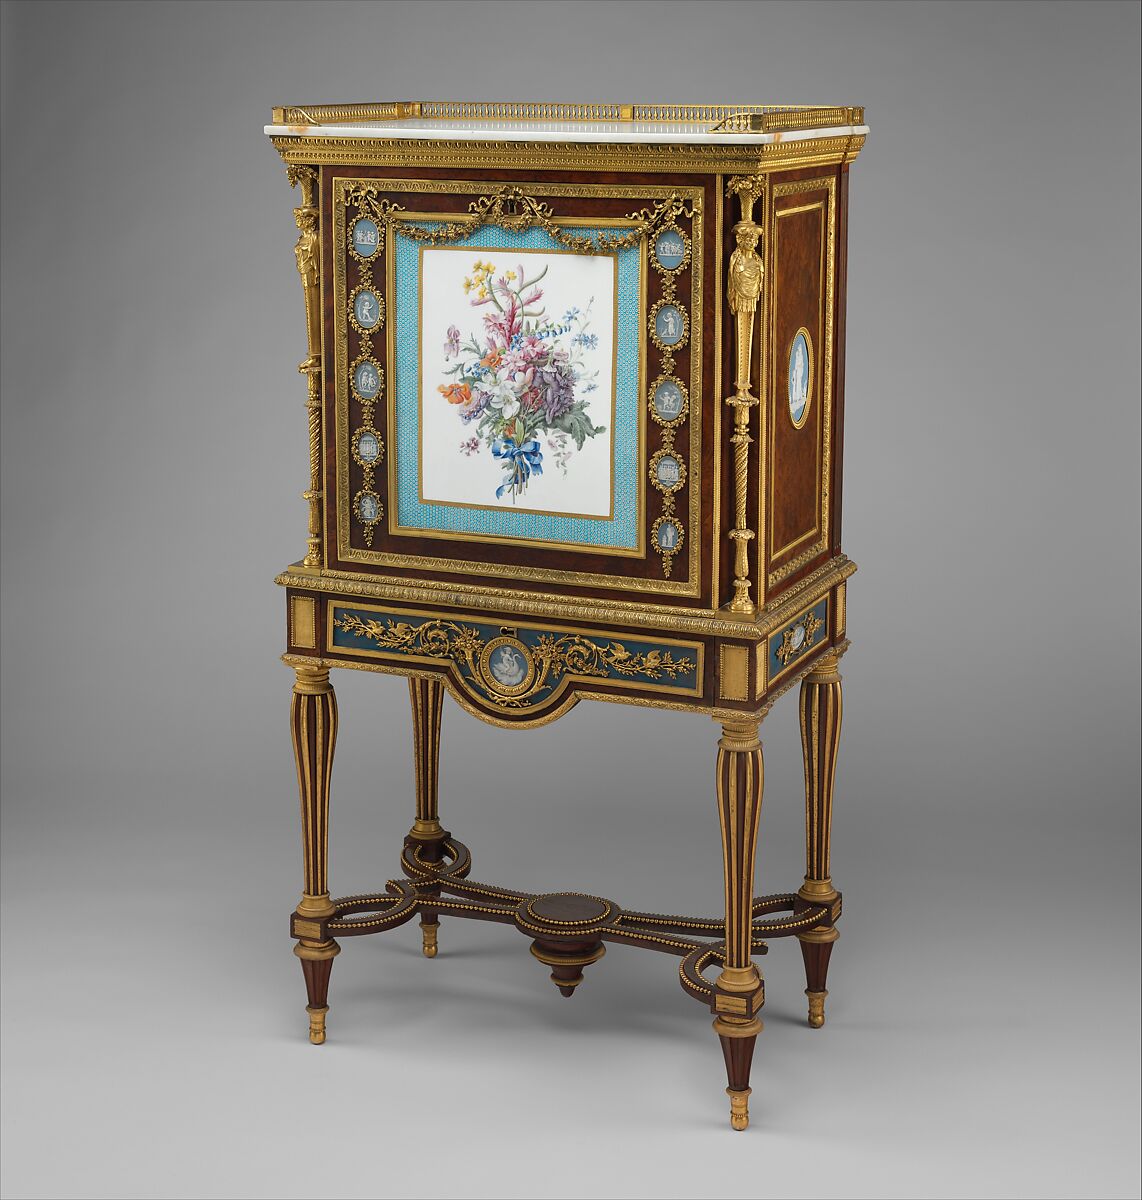 Drop-front desk (secrétaire à abattant or secrétaire en cabinet), Adam Weisweiler  French, Oak veneered with burl thuya, amaranth, mahogany, satinwood, holly, and ebonized holly; painted metal; one soft-paste porcelain plaque; fifteen jasper medallions; gilt-bronze mounts; marble; leather (not original), French, Paris and Sèvres